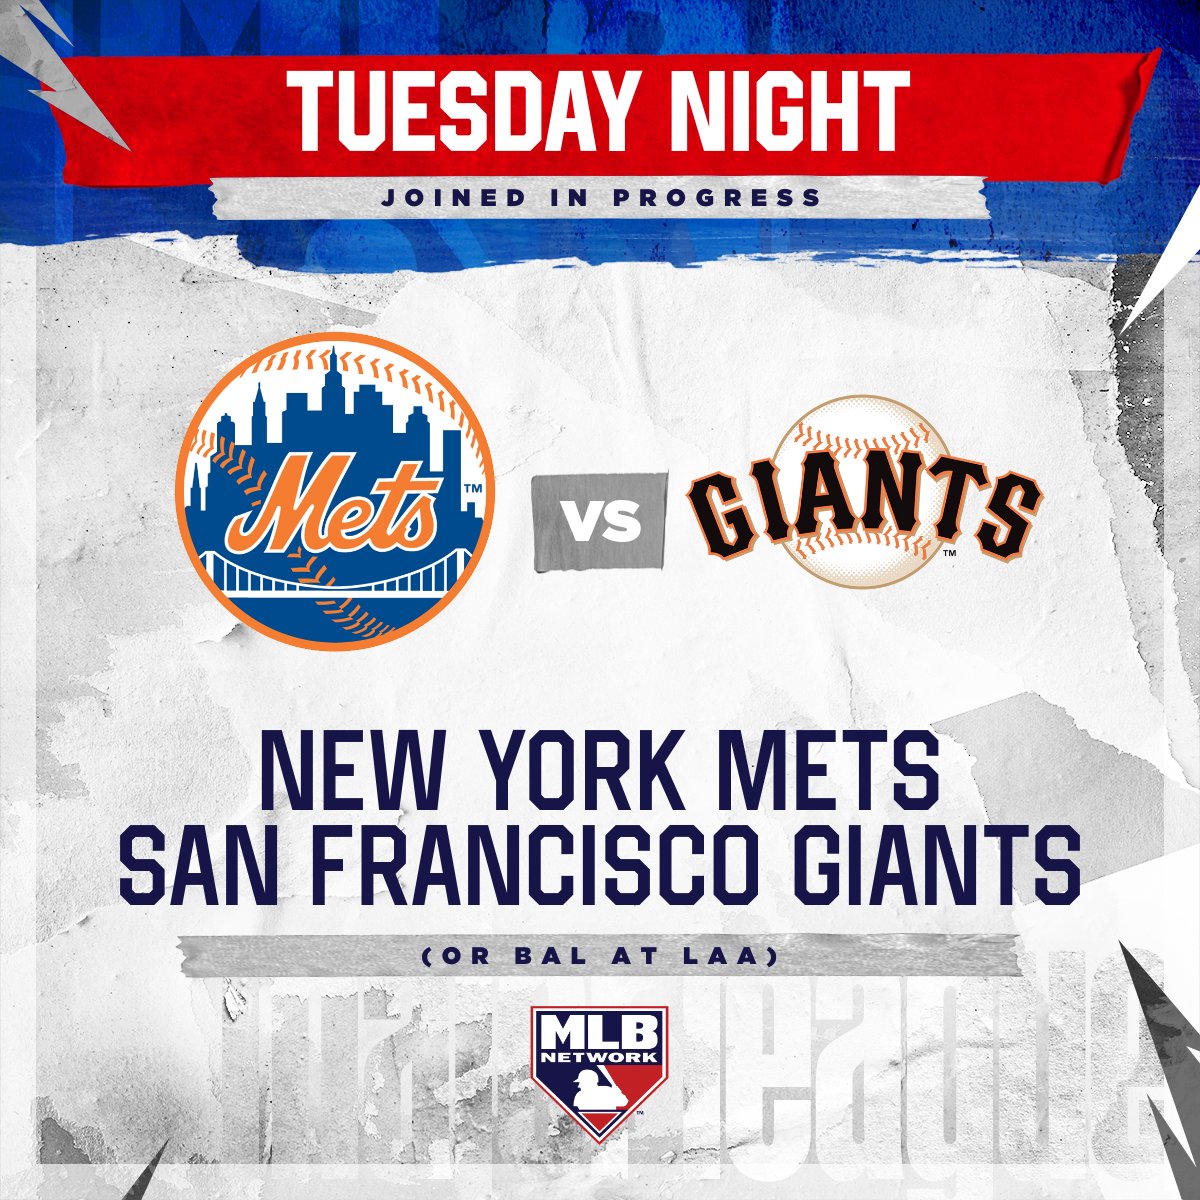 Coming up after #MLBBigInning, we are heading out to San Francisco to catch the rest of the @Mets and @SFGiants game on MLB Network! (or BAL at LAA)